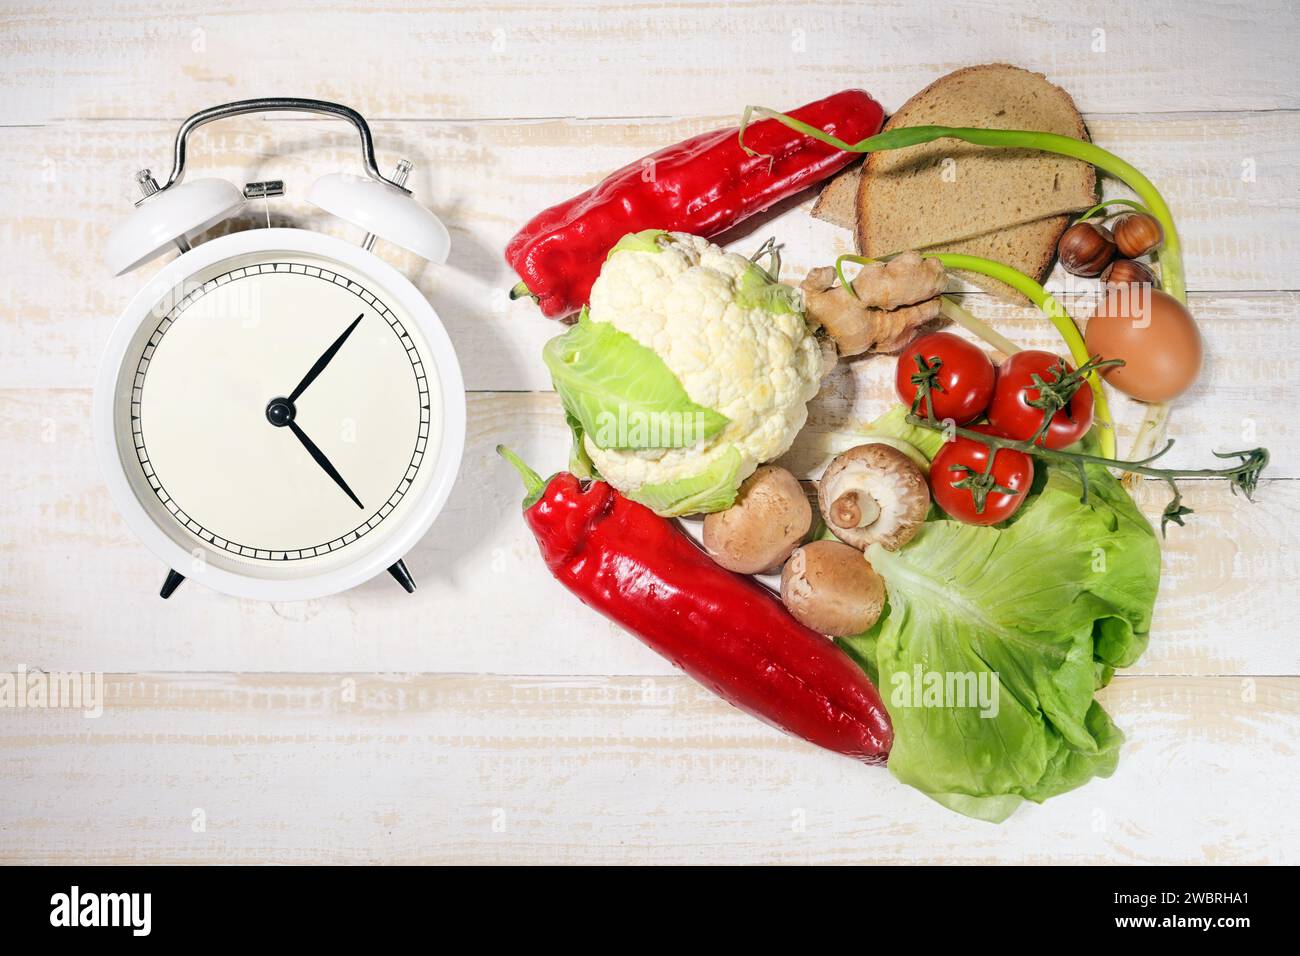 Interval fasting or IF, food products, and an alarm clock indicate the period of time during which it is allowed to eat, diet concept for losing weigh Stock Photo